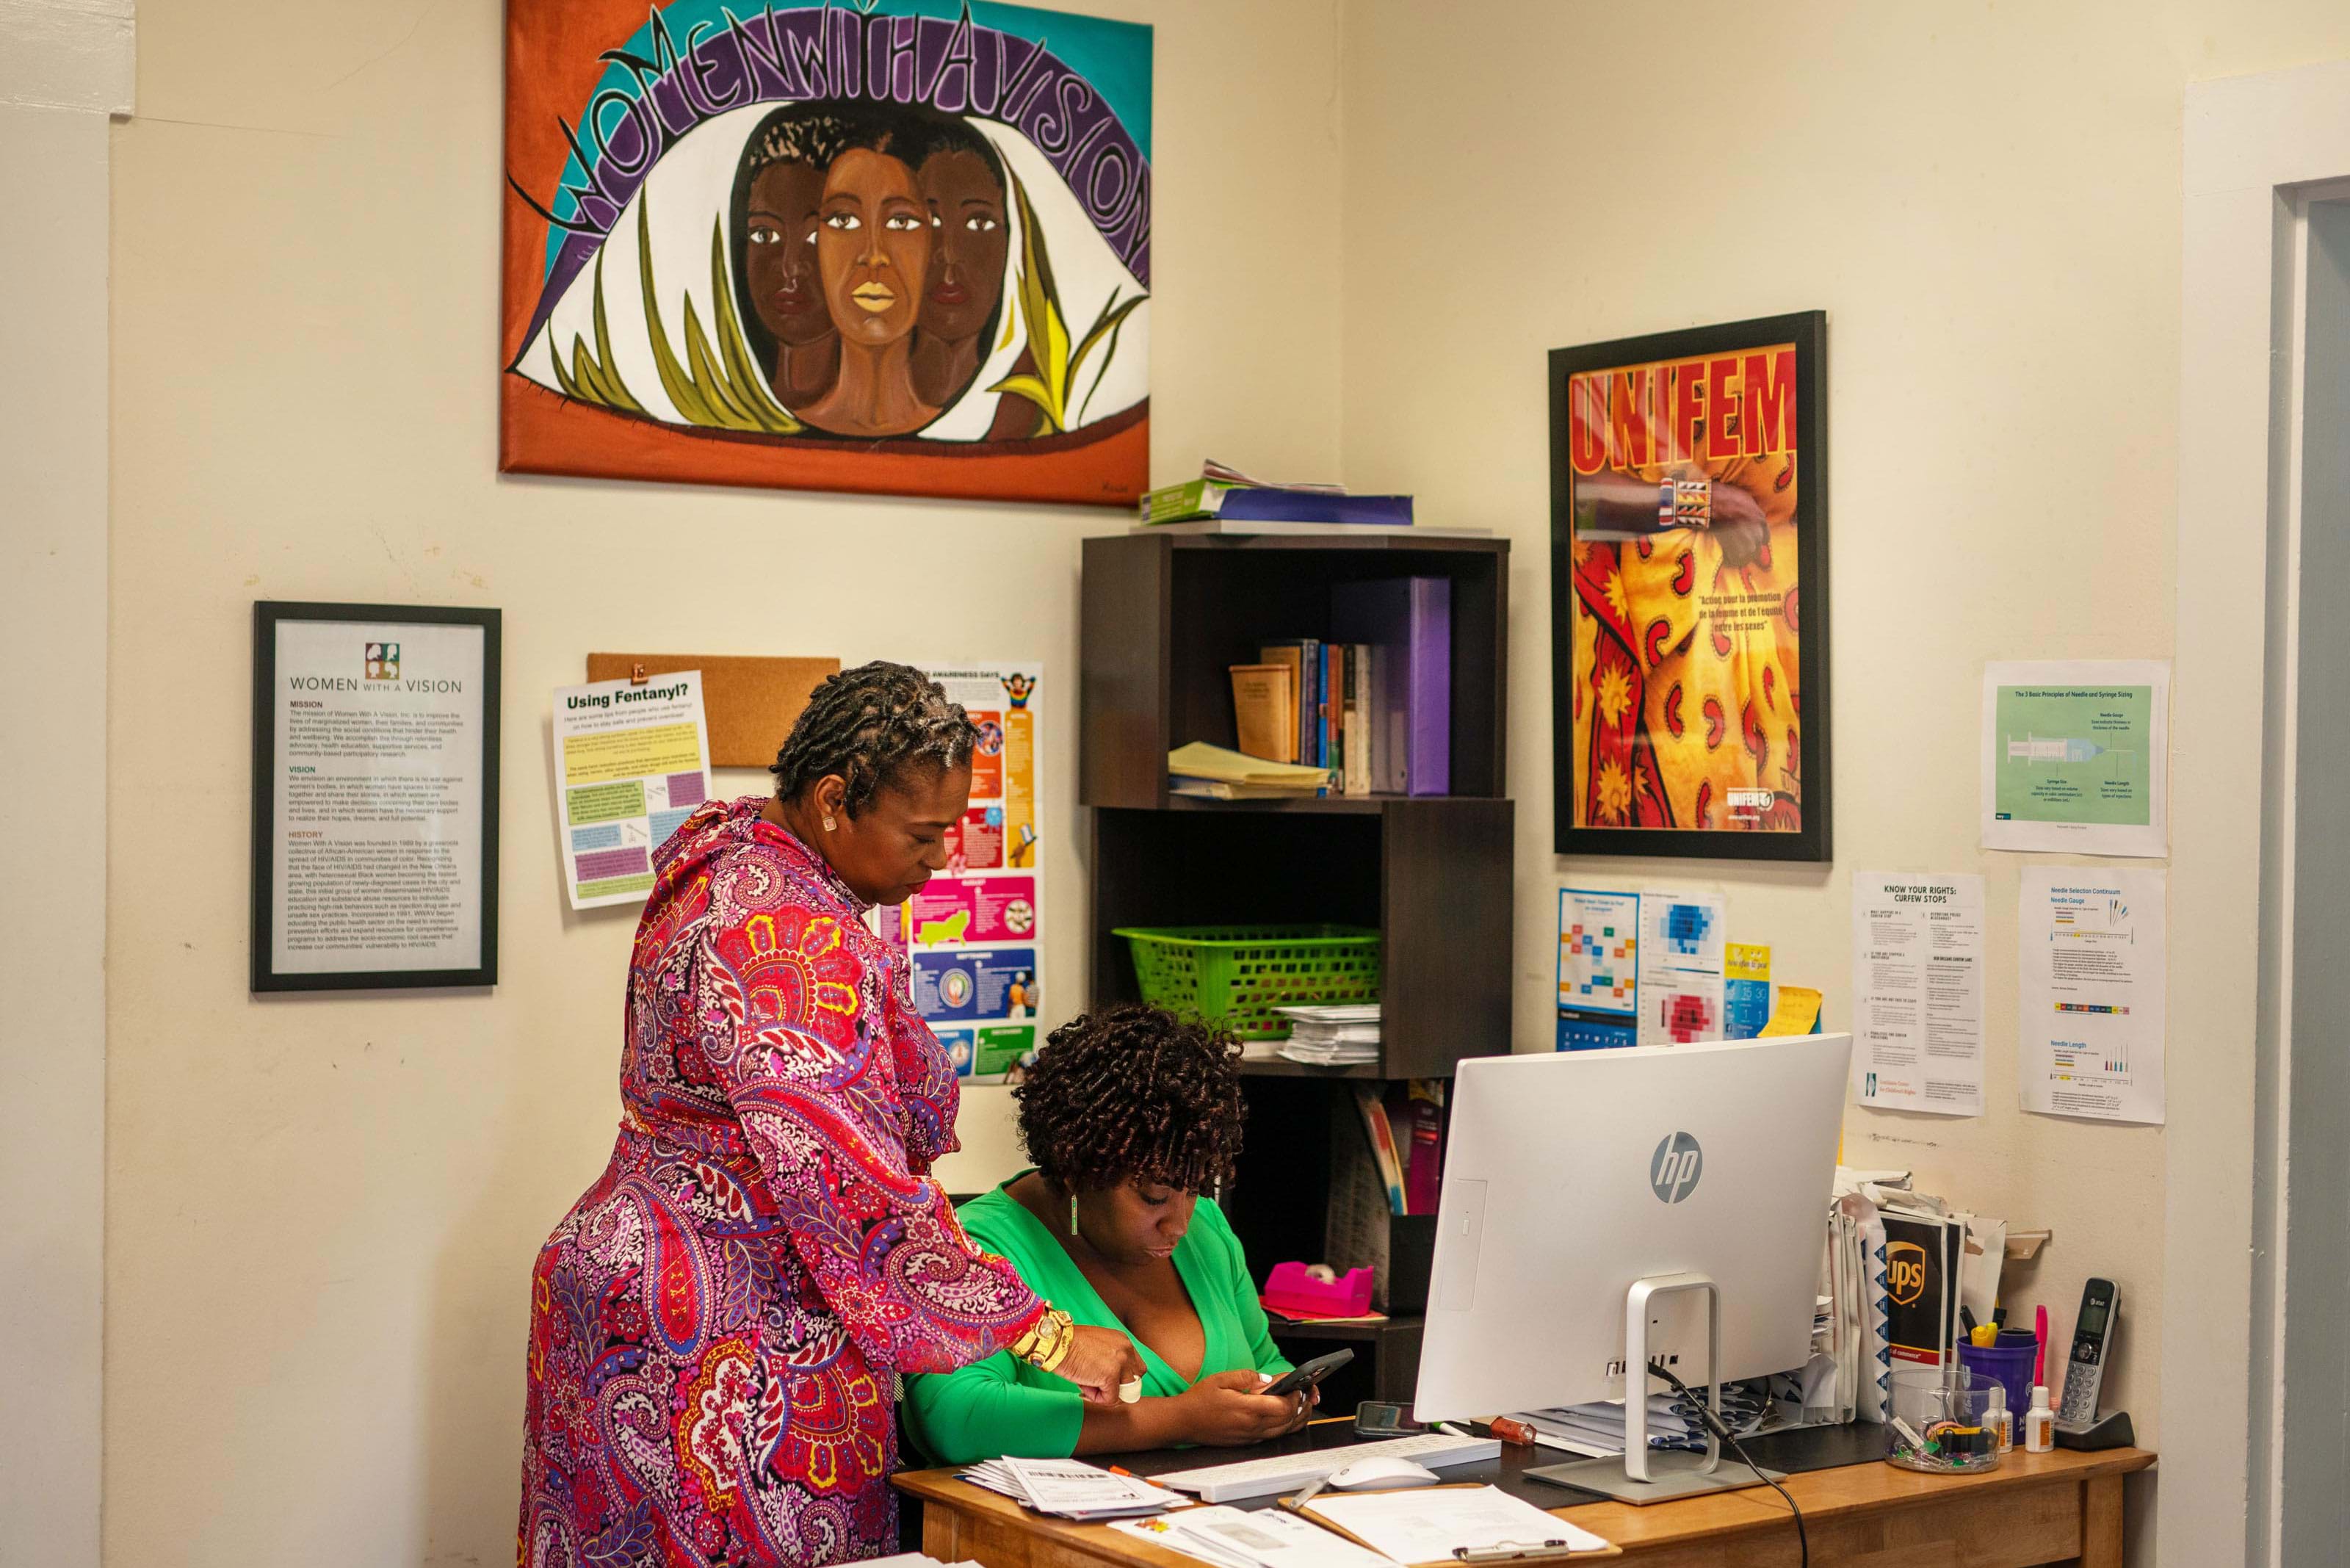 Deon looks over the shoulder of another woman in a bright green dress as they work on a crowded desk. The wall behind them is decorated with documents, books, and artwork. 